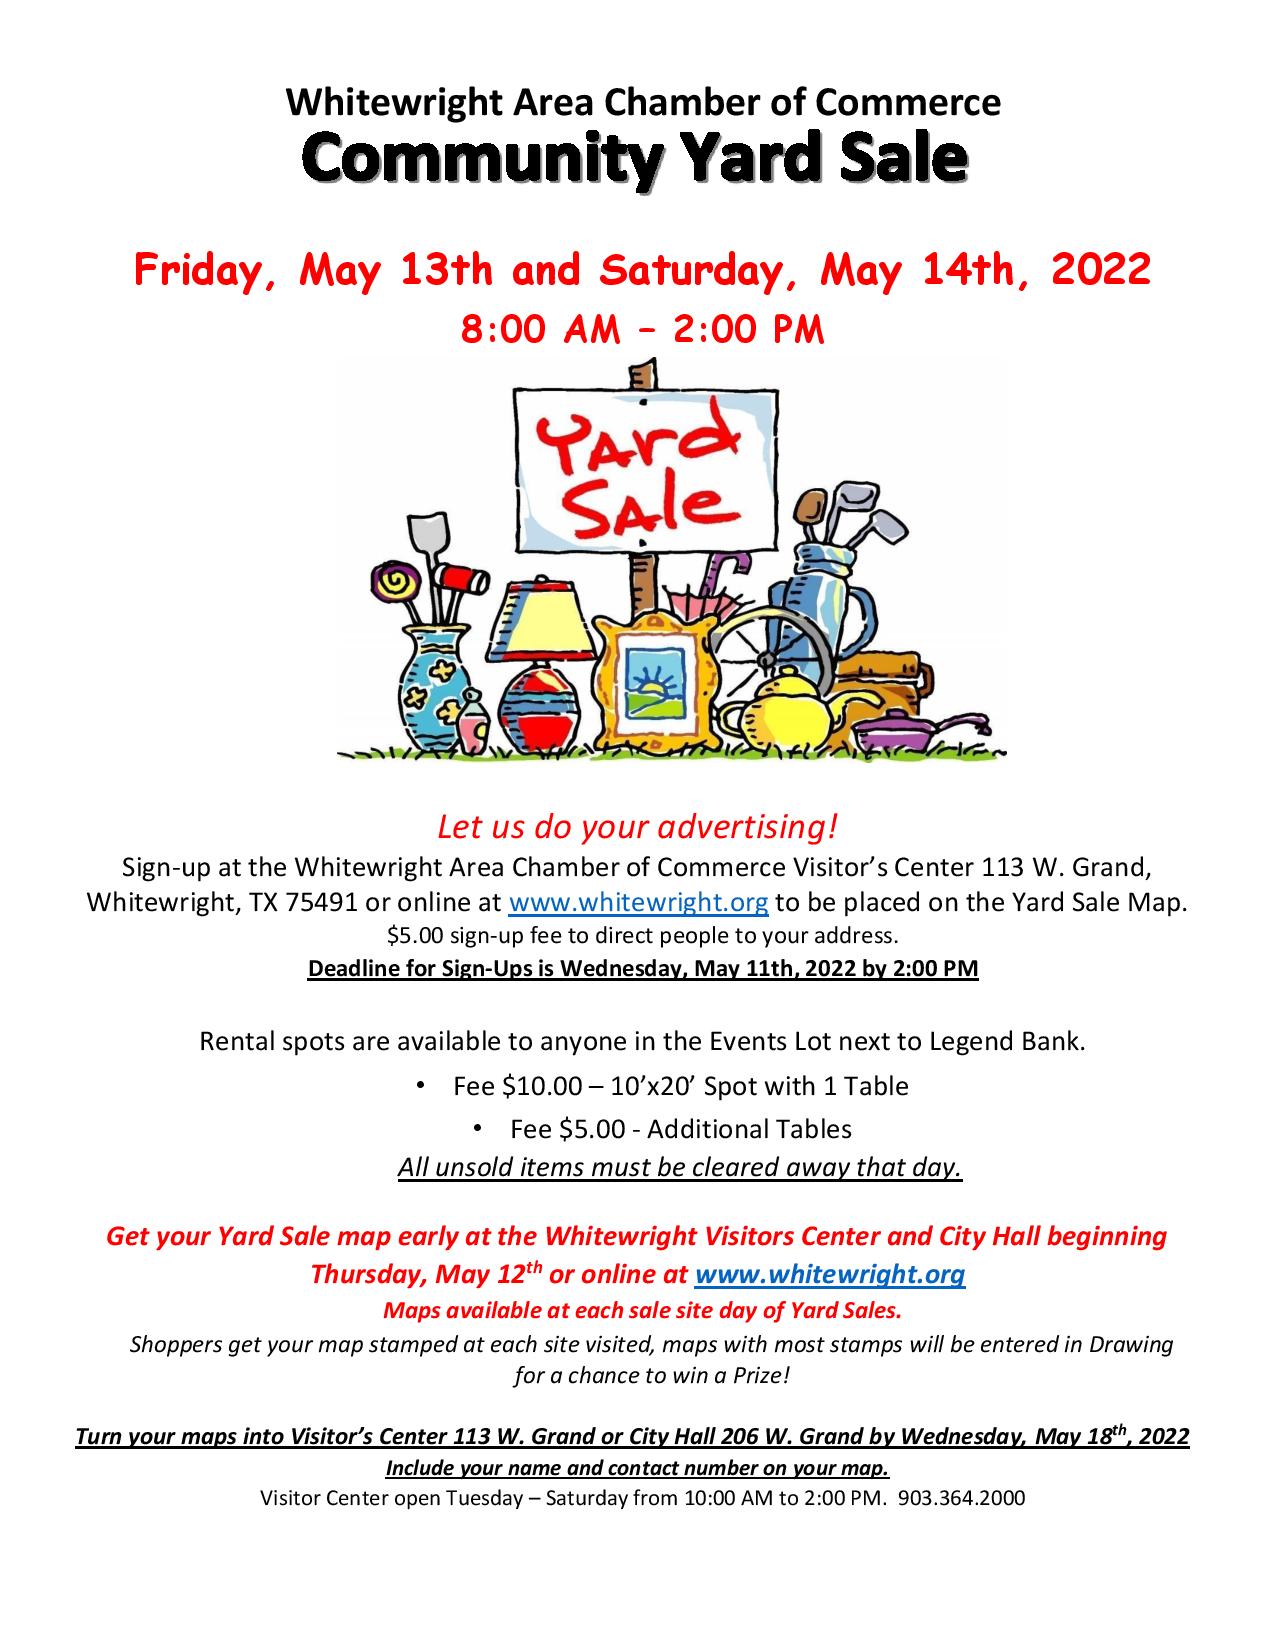 Community Yard Sale - May 13th & 14th 2022 (Registration Form Attached)